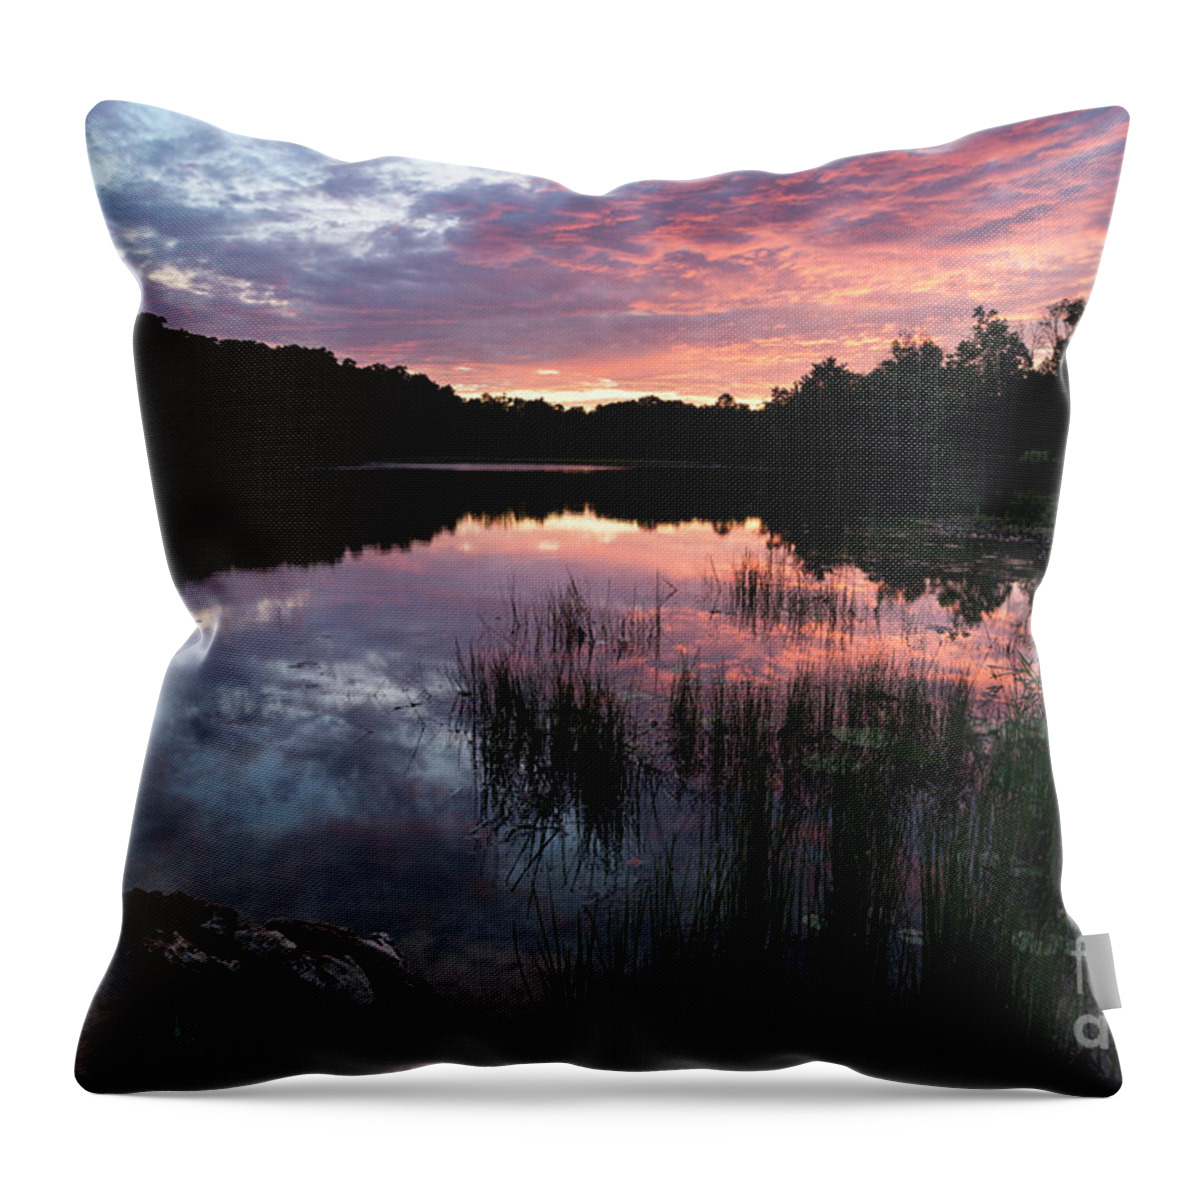 Sunset Throw Pillow featuring the photograph Midwestern Sunset - D010407 by Daniel Dempster